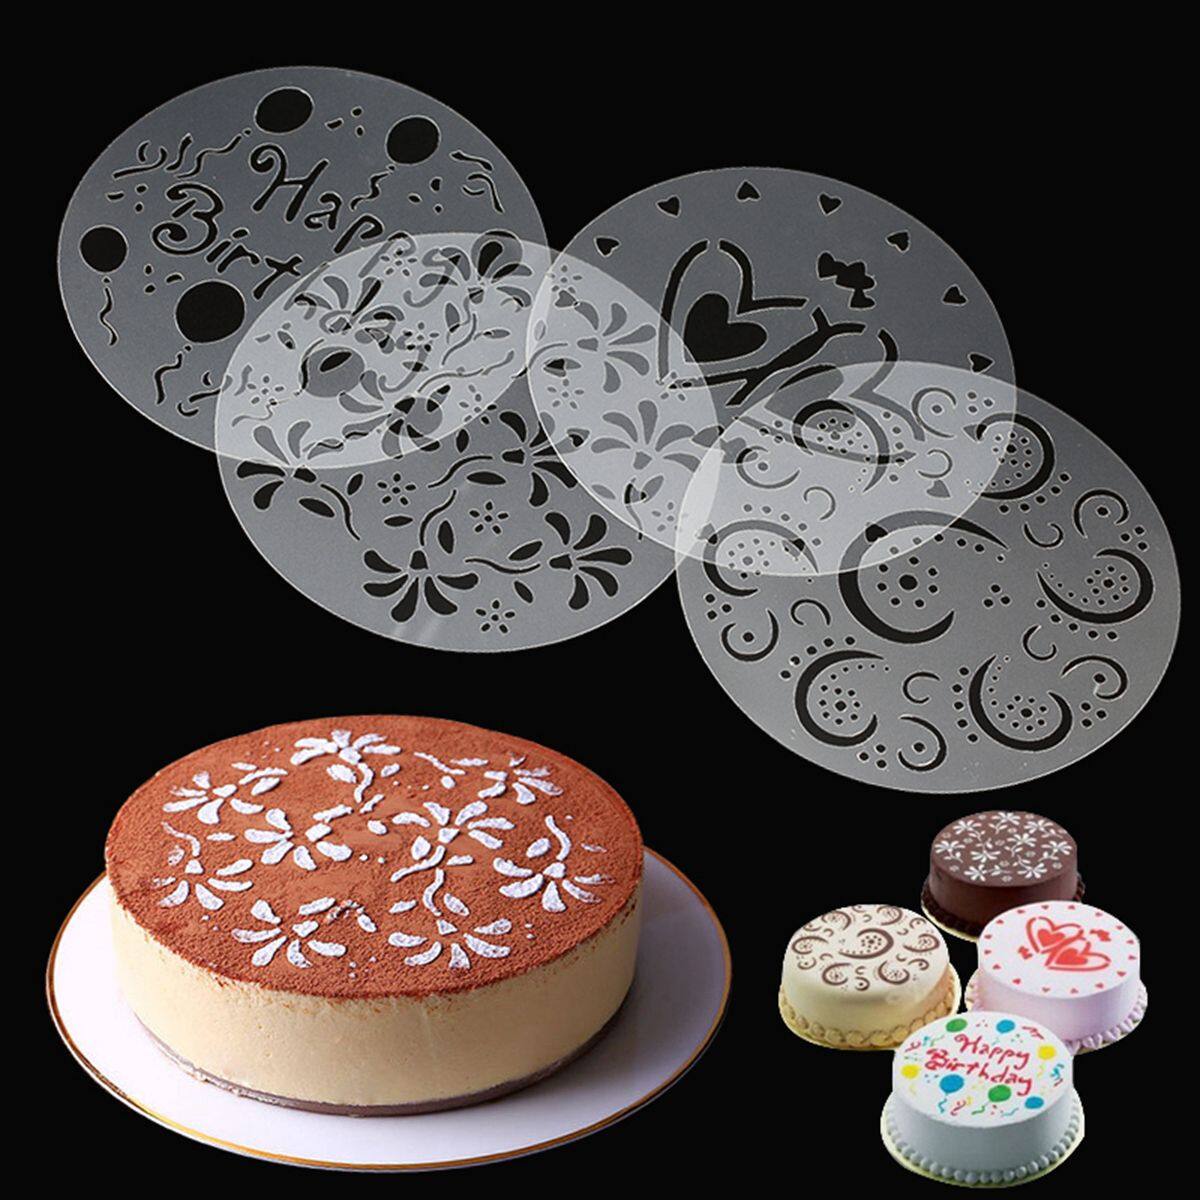 Birthday Spiral Template Variety Decorating Cake Stencil. 4Pcs Flower Heart Cake Mold,Cupcake Cooking Coffee Stencil Set 